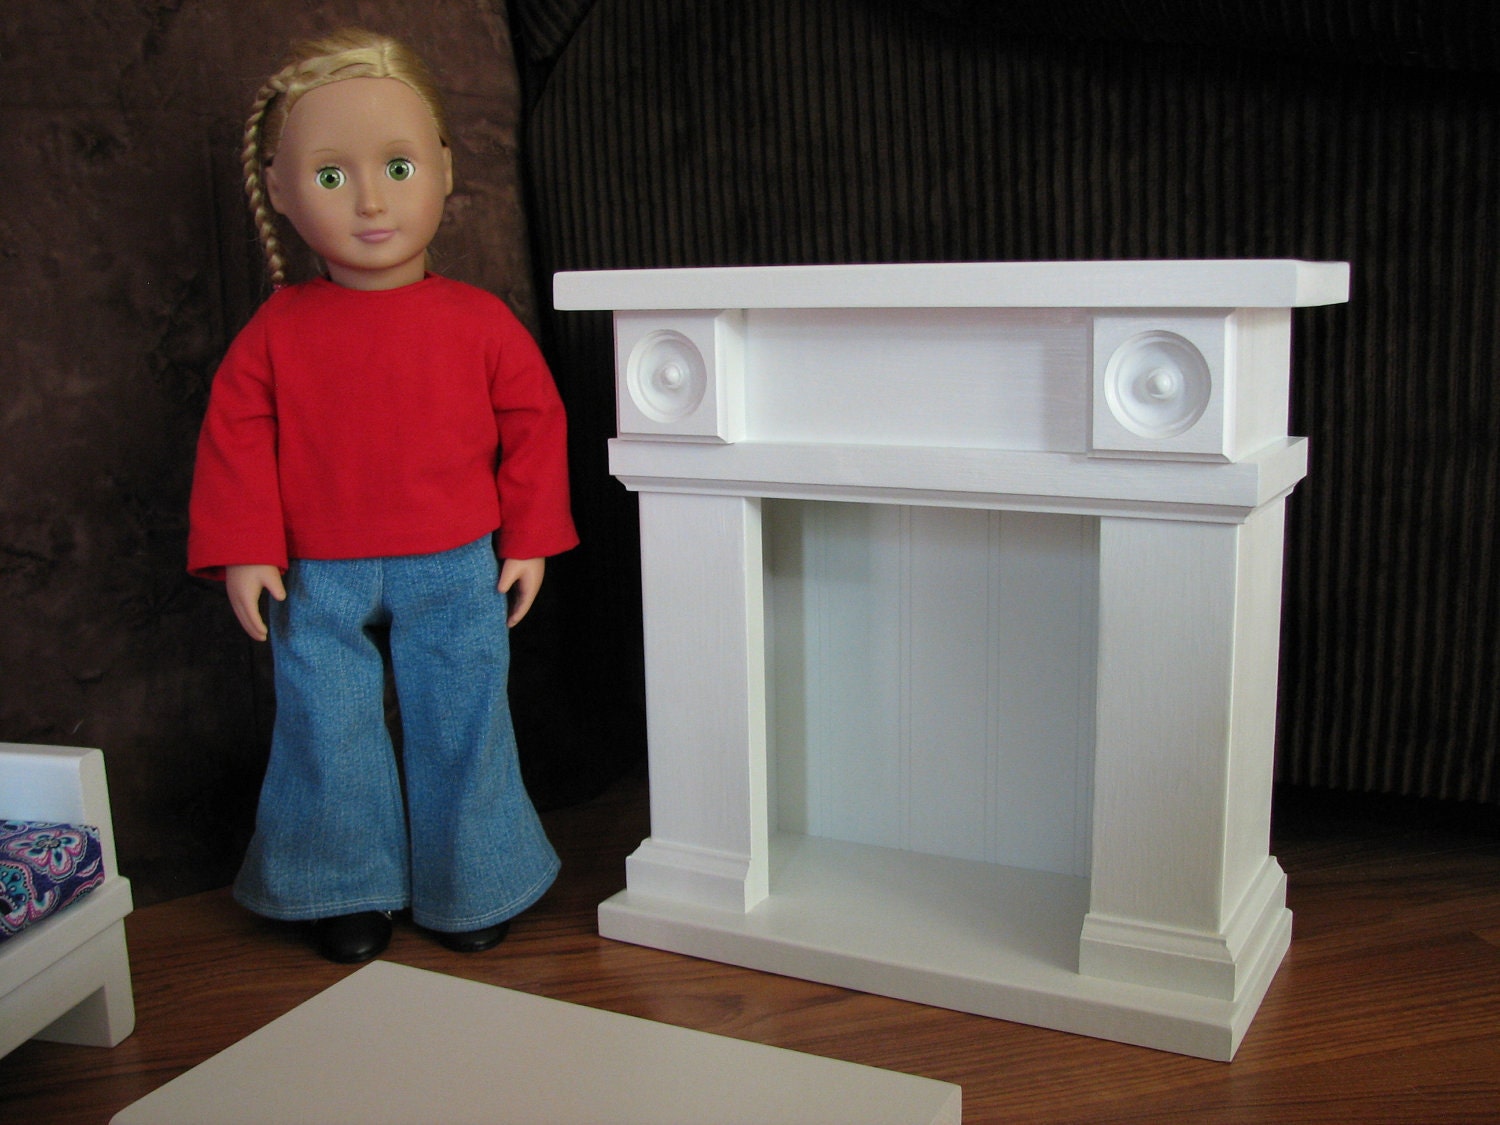 Fireplace Doll Furniture for American Girl or other 18" doll